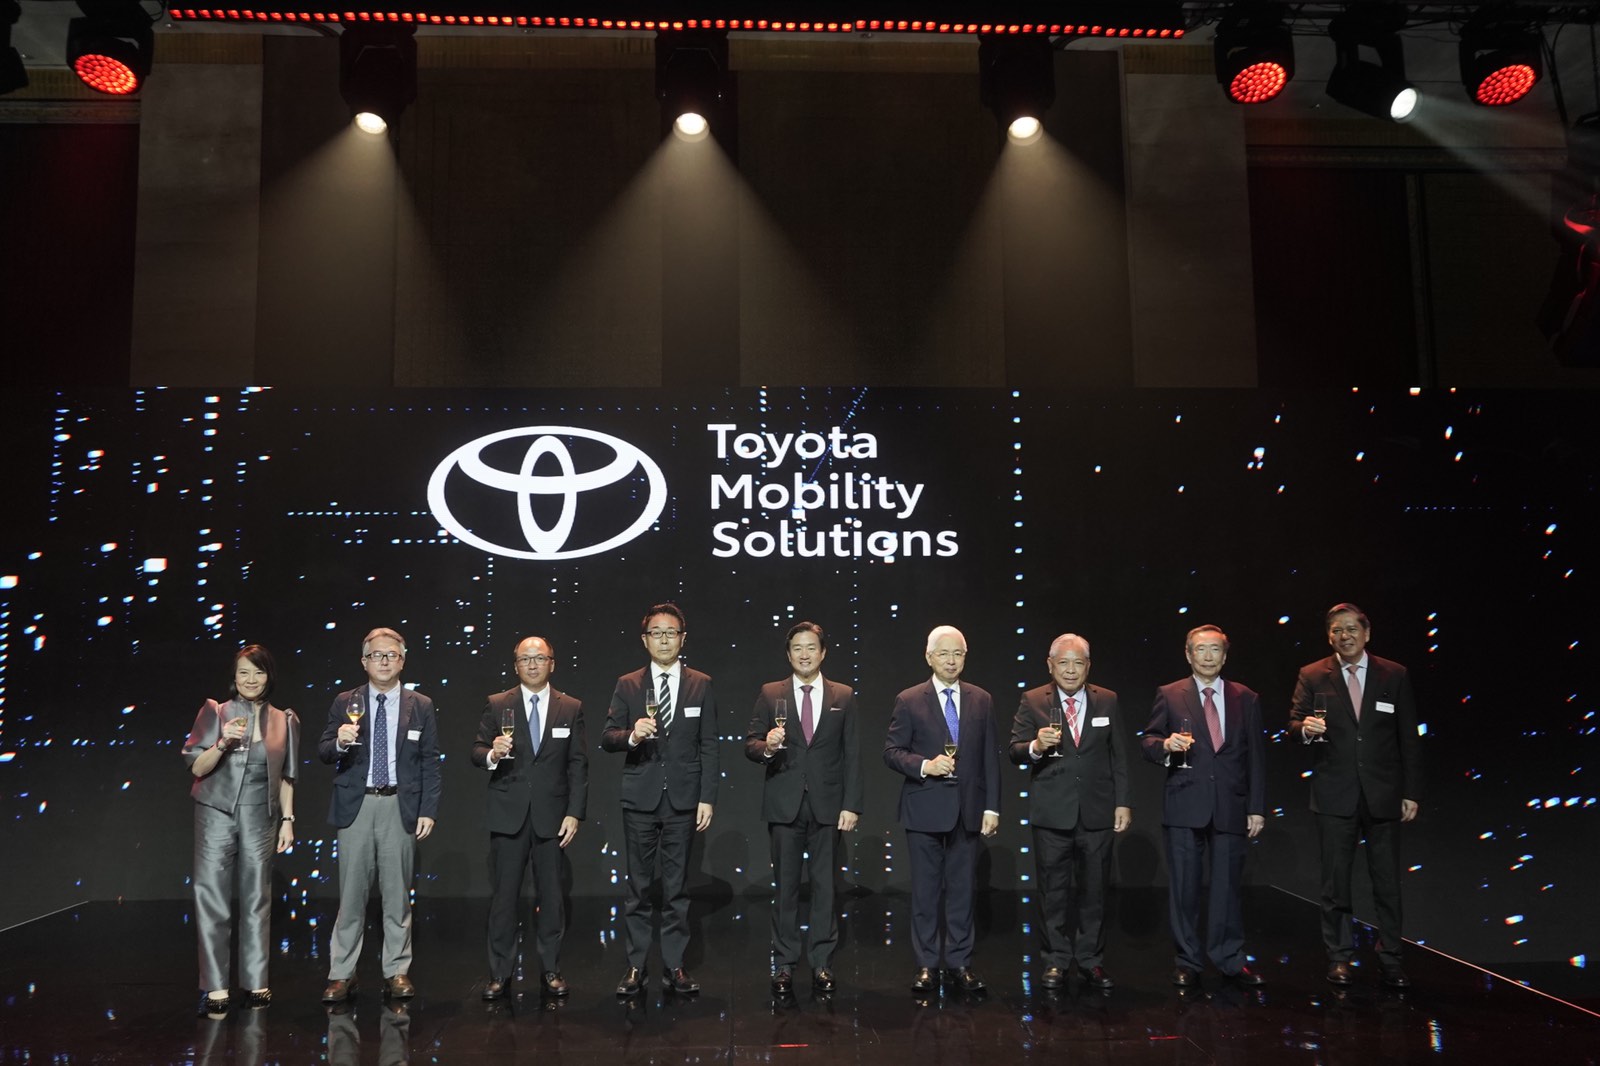 Toyota Mobility Solutions Philippines Inc. (TMSPH) is the automotive giant’s next big move